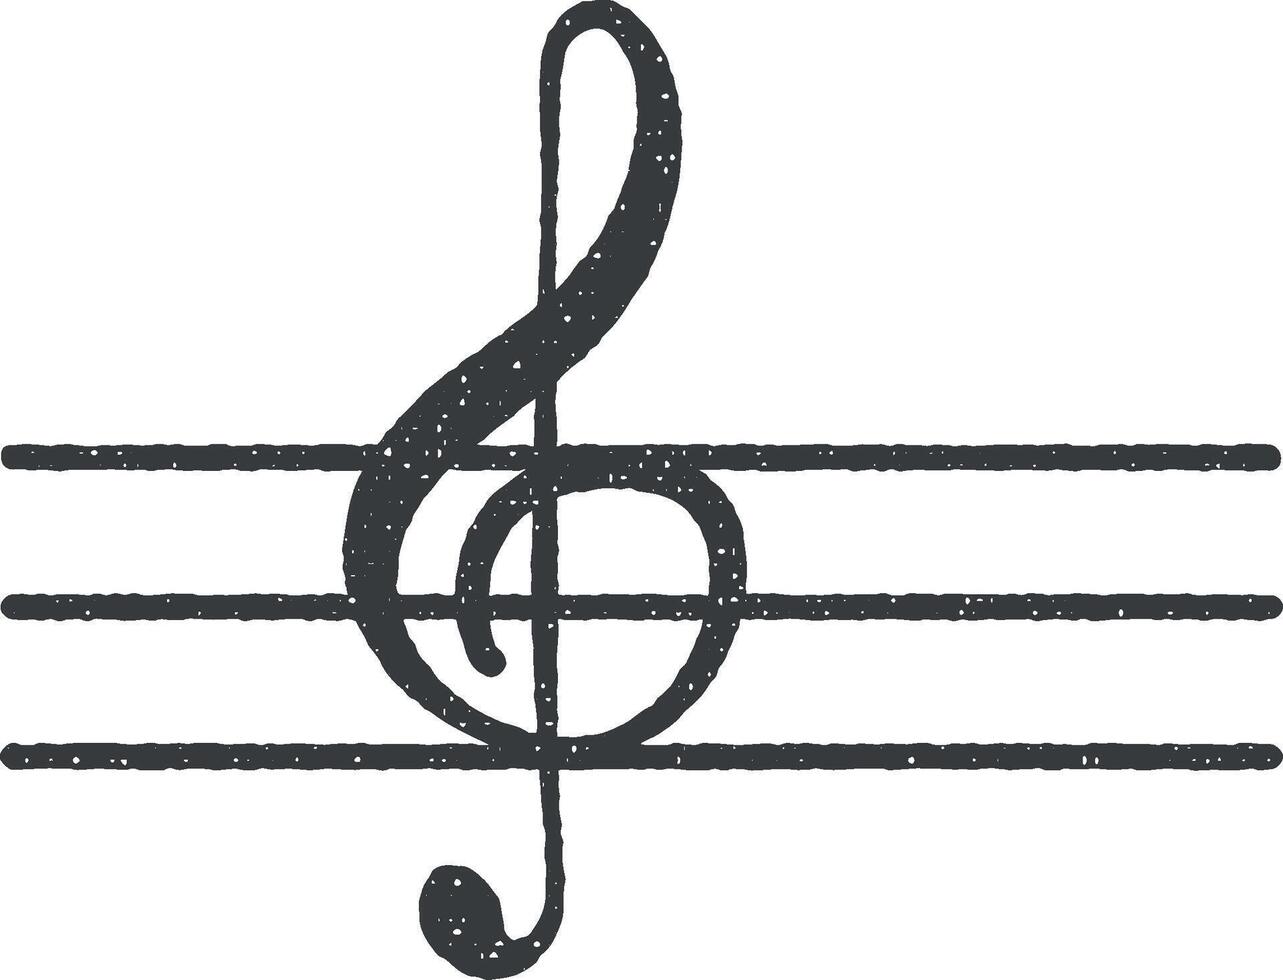 musical note in a circle vector icon illustration with stamp effect